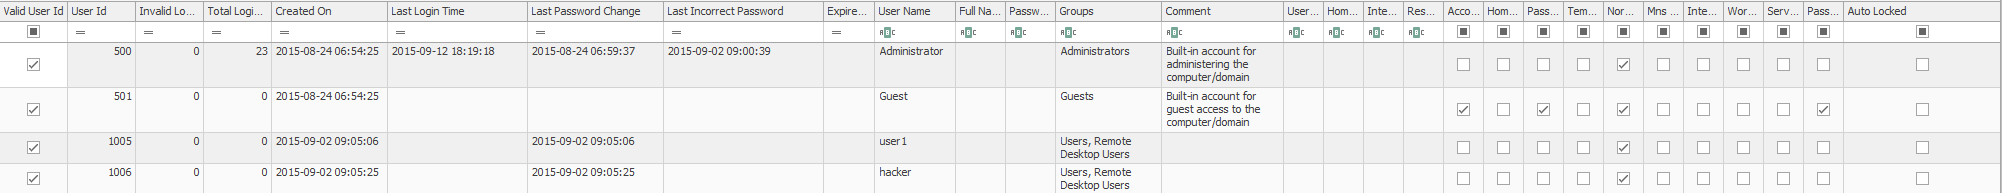 Image of the User Accounts table